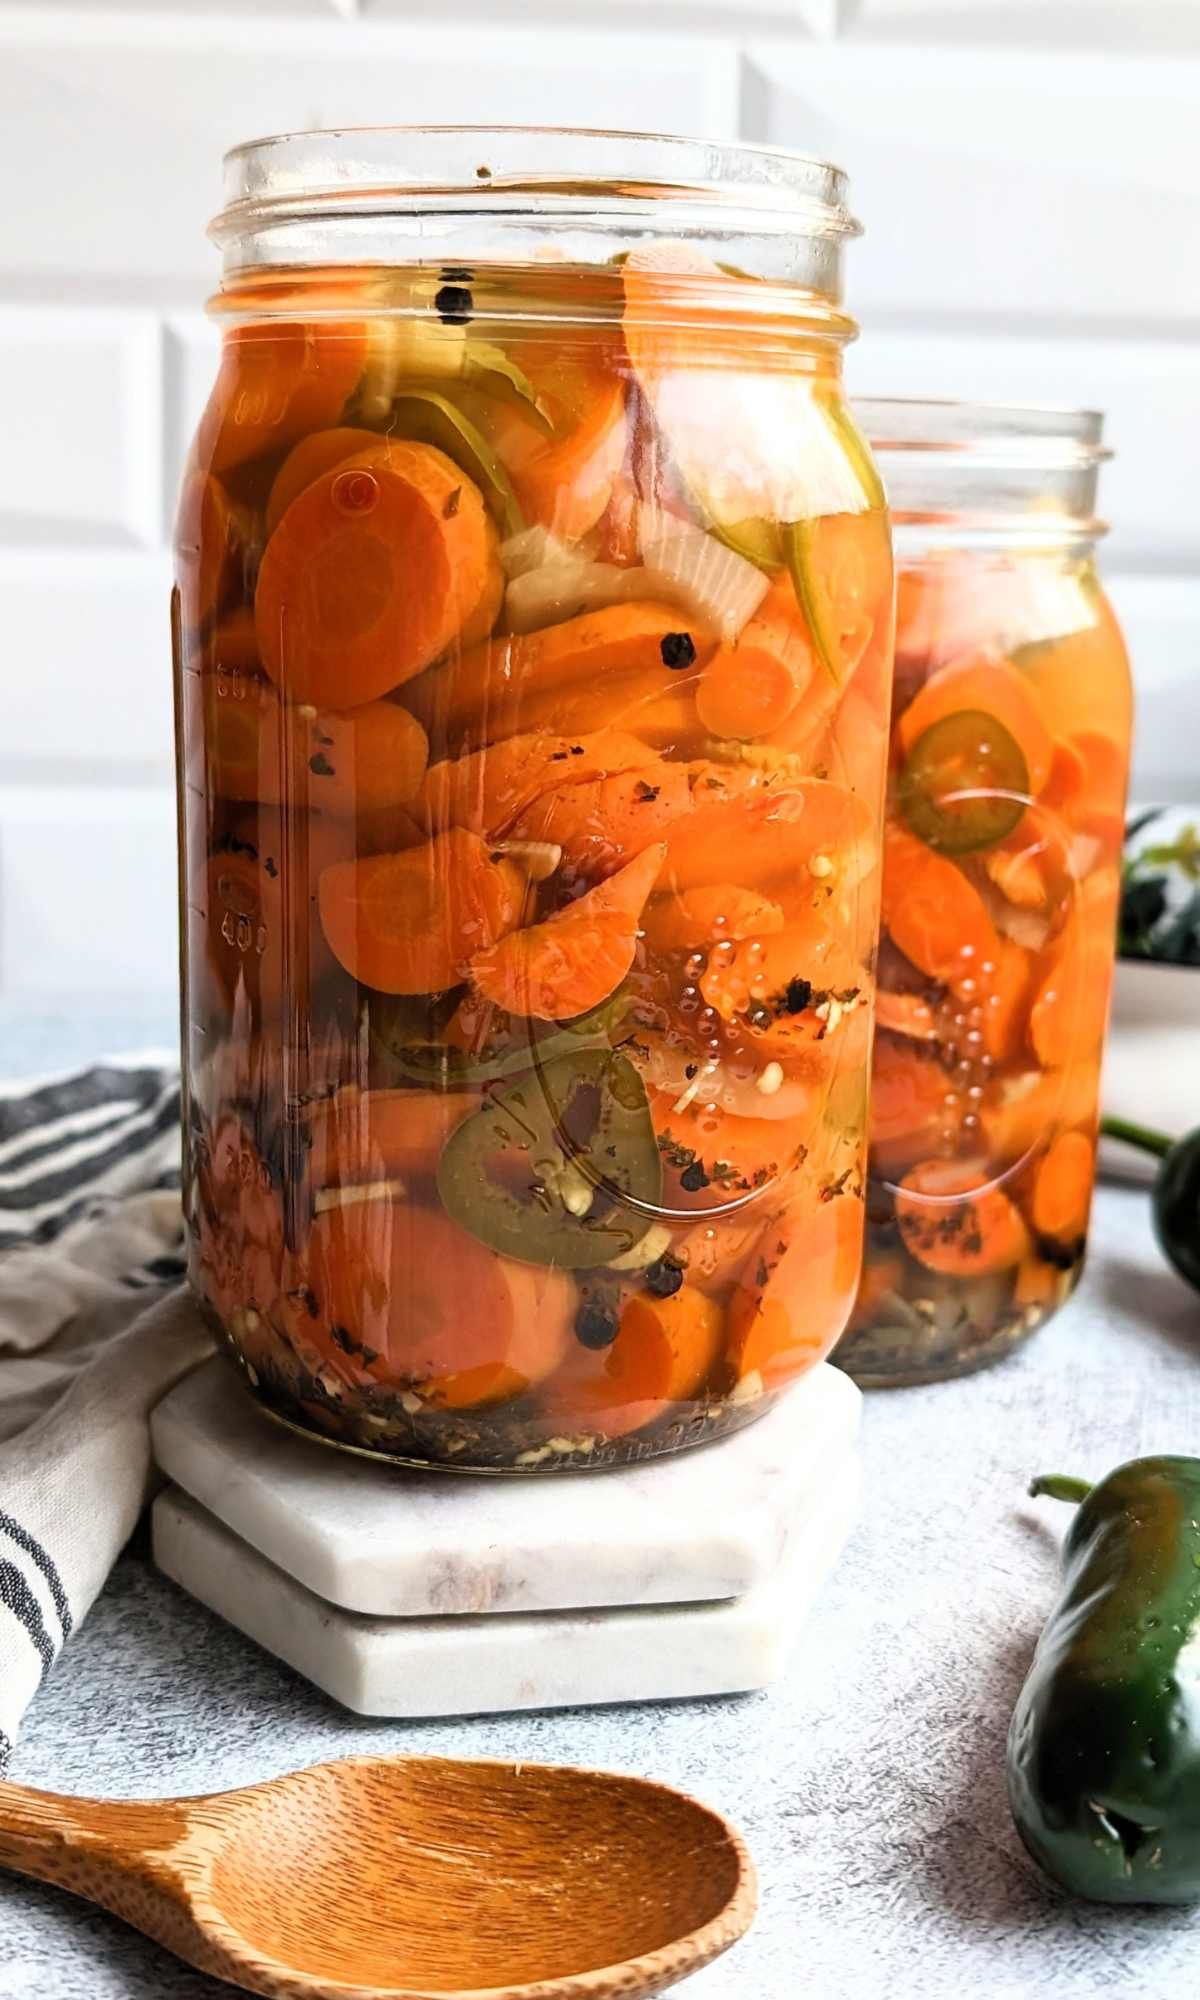 spicy pickled carrots recipe vegan gluten free taco condiment mexican restaurant style spicy carrots recipe paleo whole30 condiments